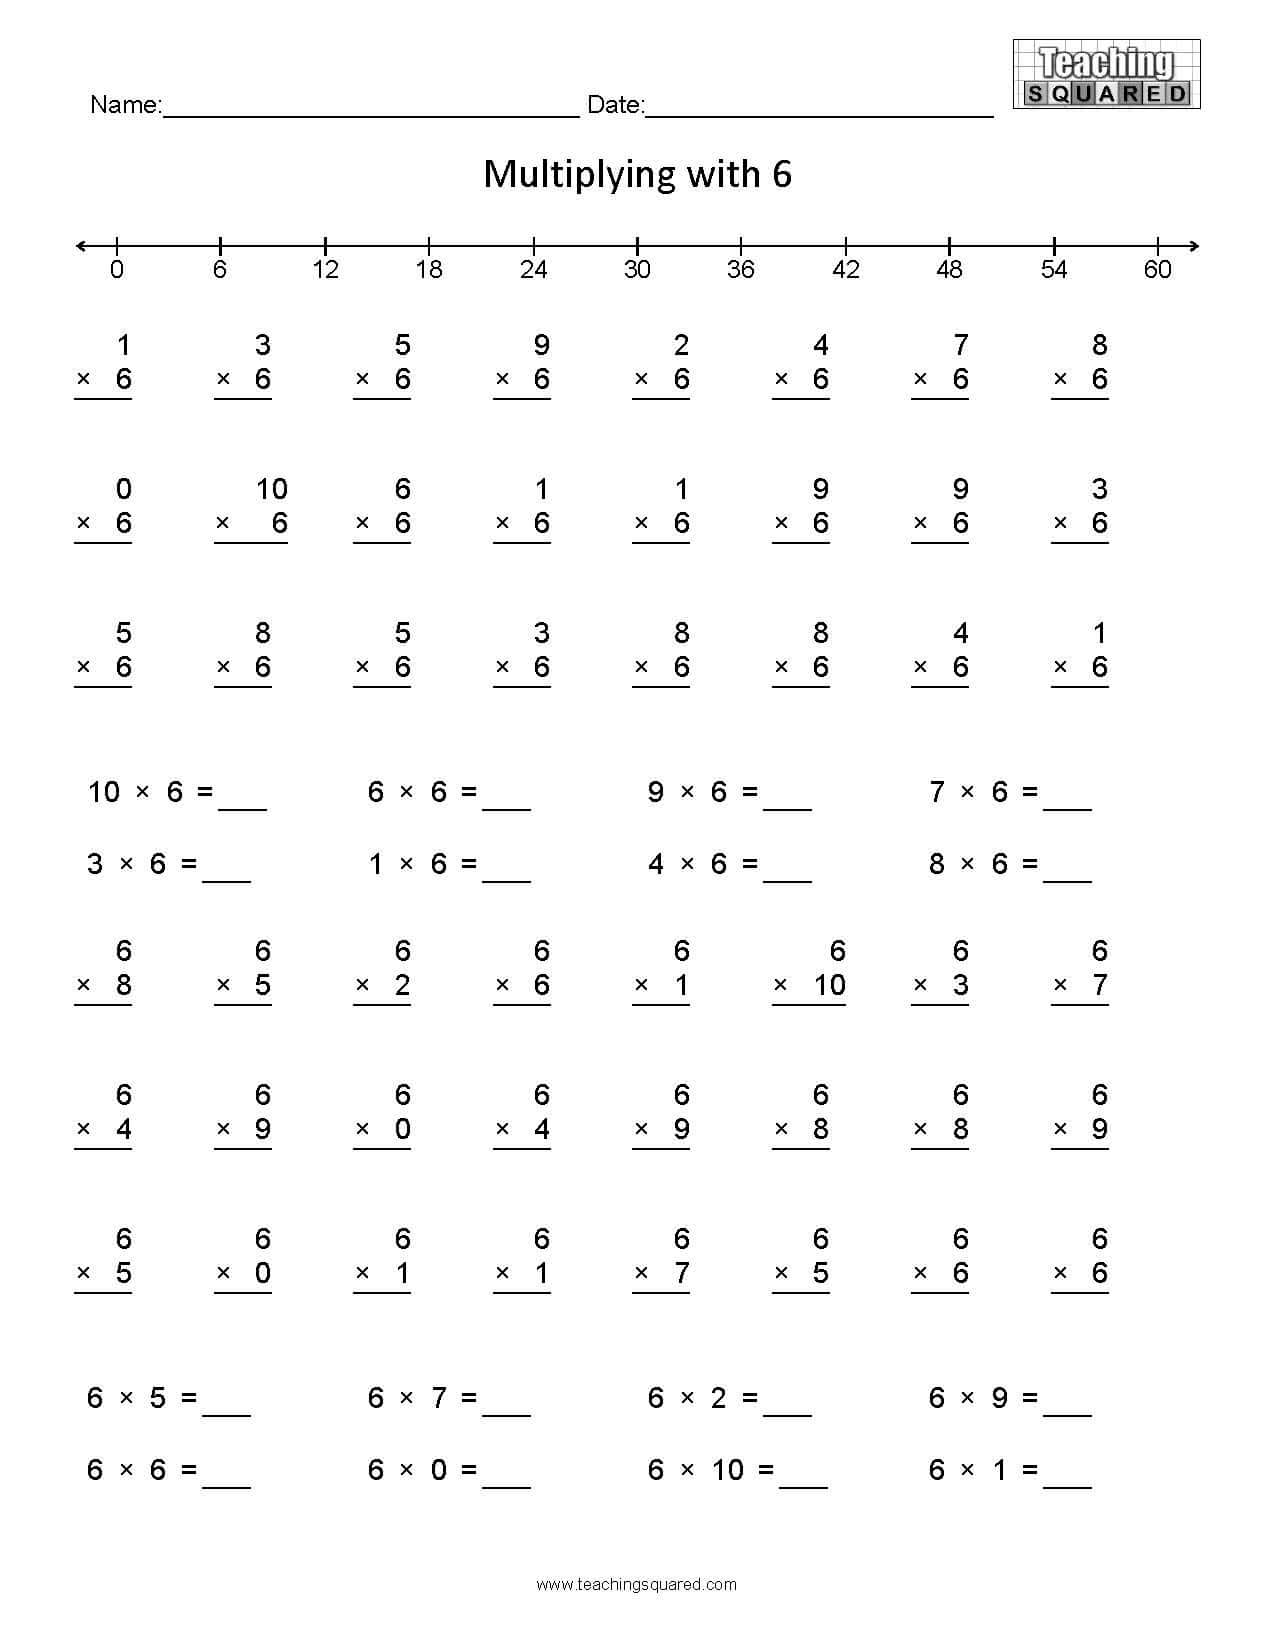 Learning Multiplication- Multiplying6 - Teaching Squared throughout 6 Multiplication Printable